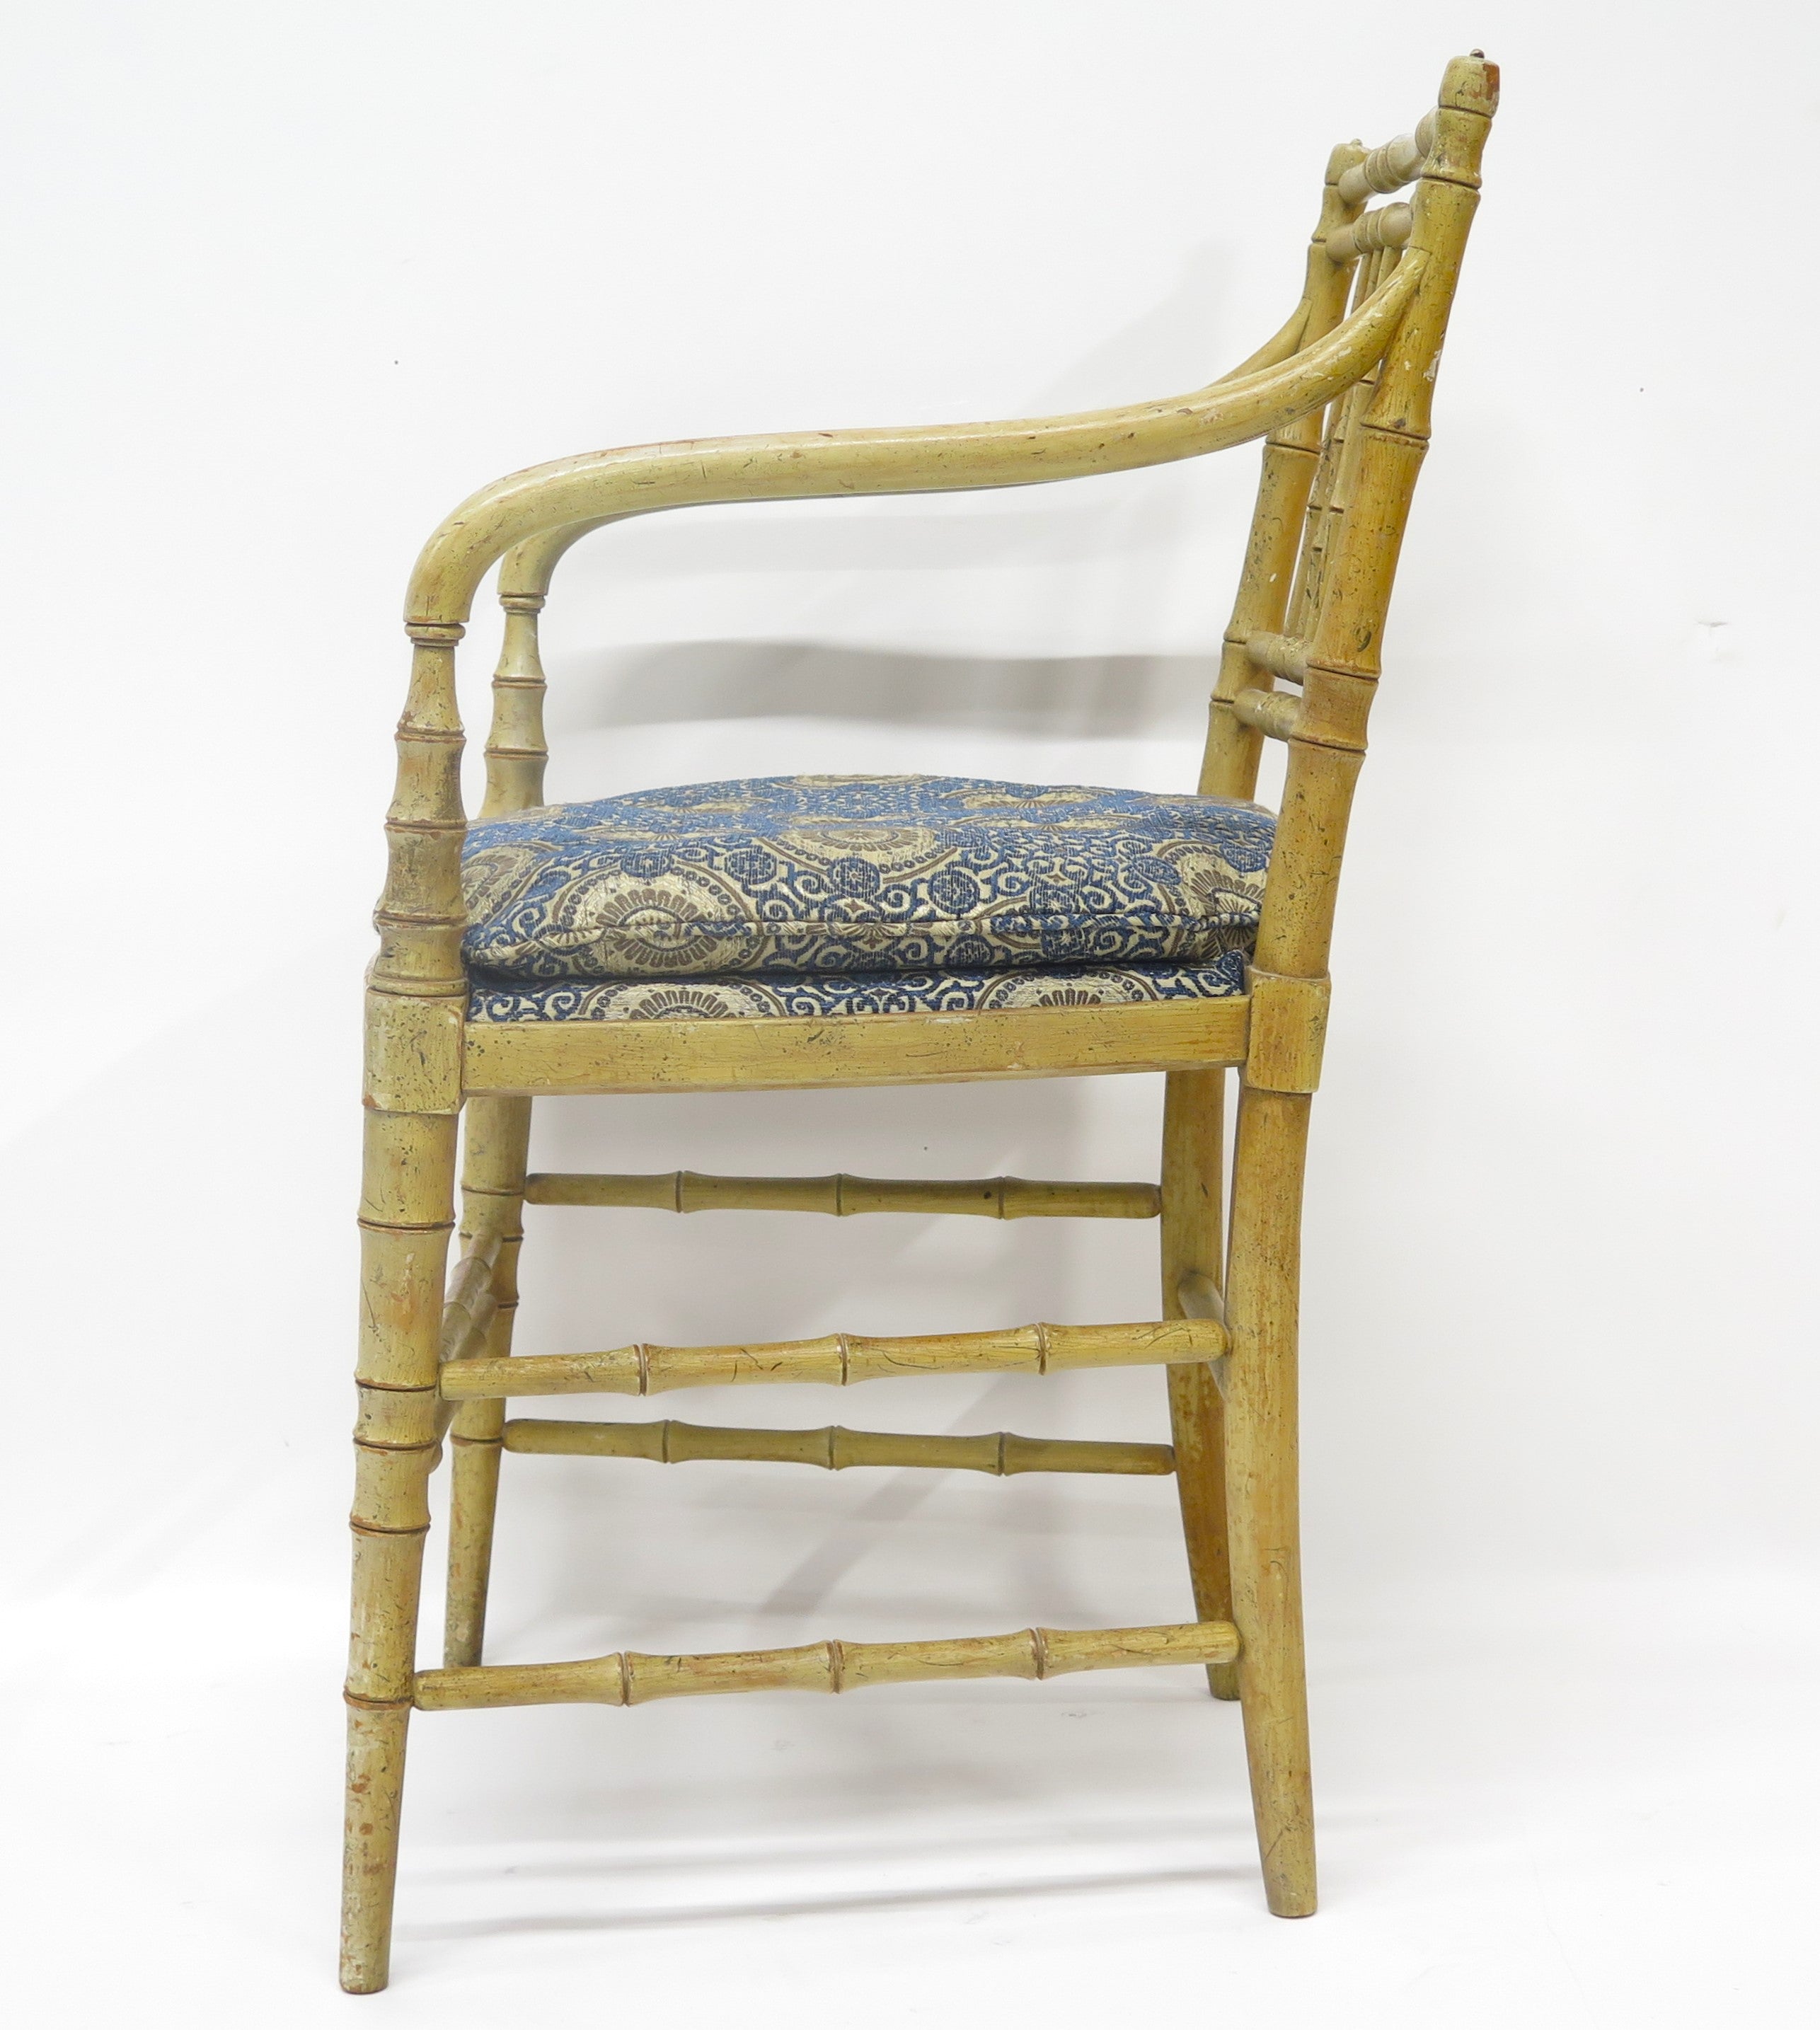 Kittinger Painted Faux Bamboo Armchair